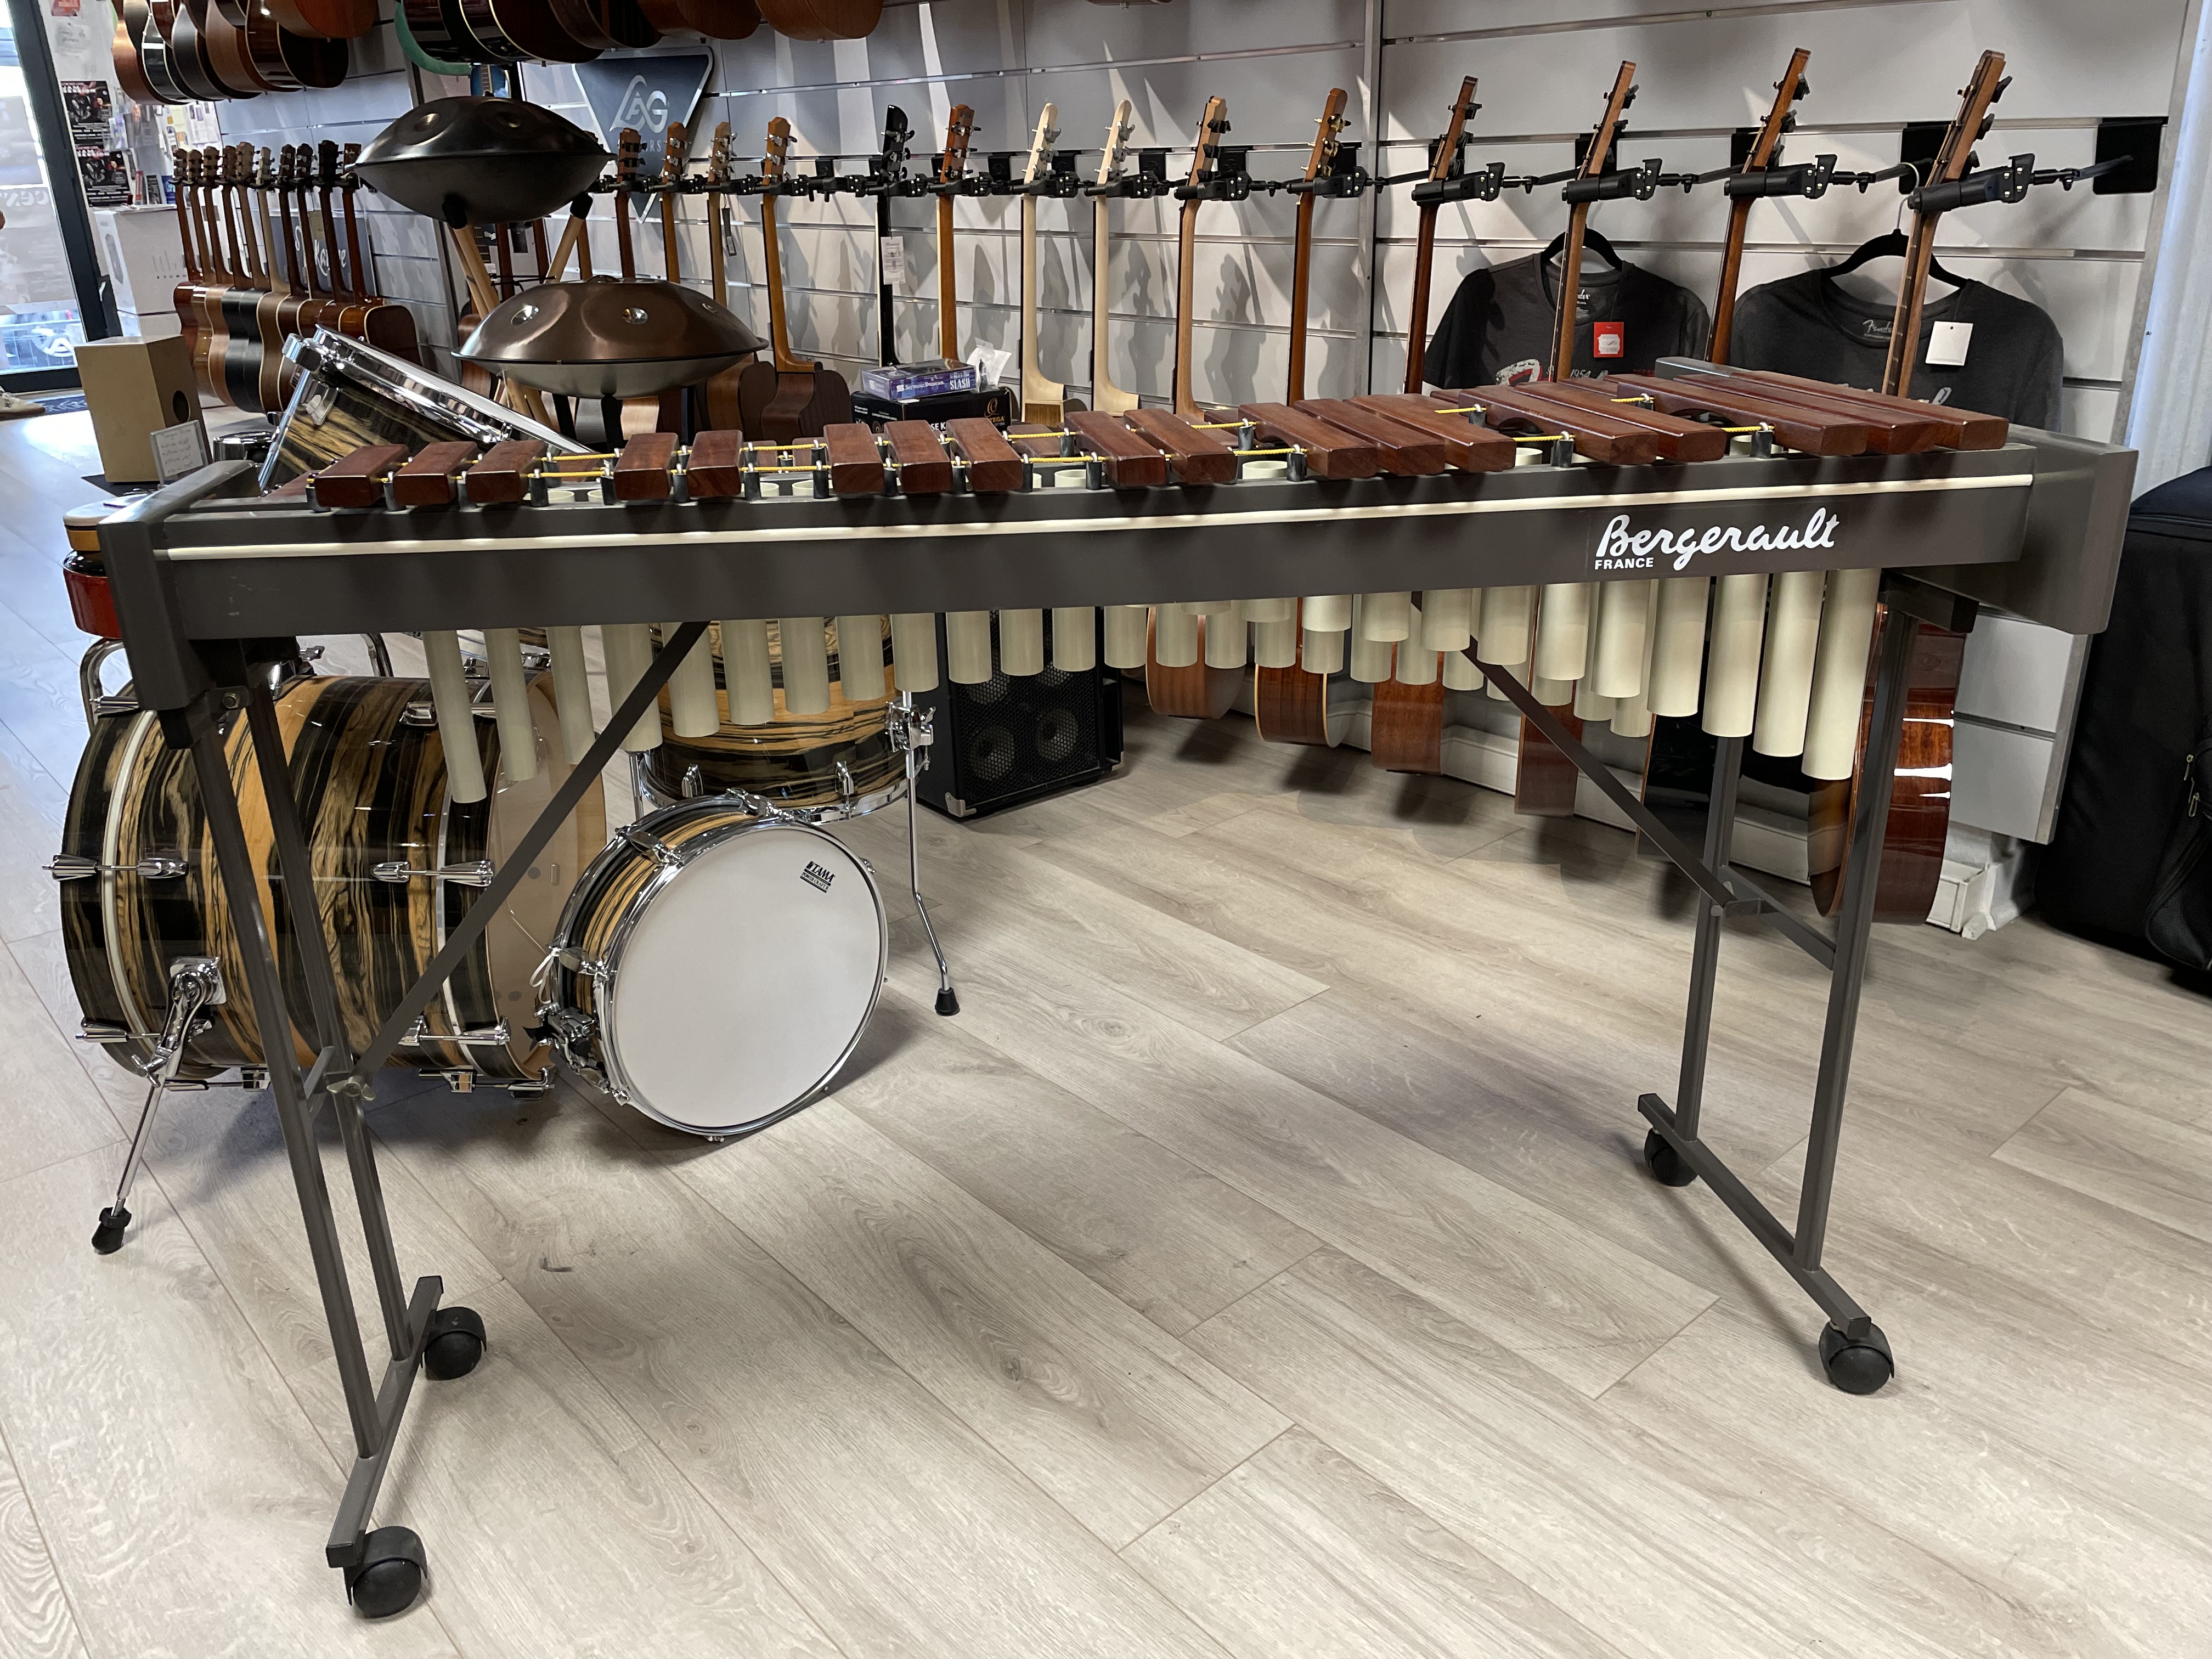 Occasion Xylophone Bergerault XE2 (France)